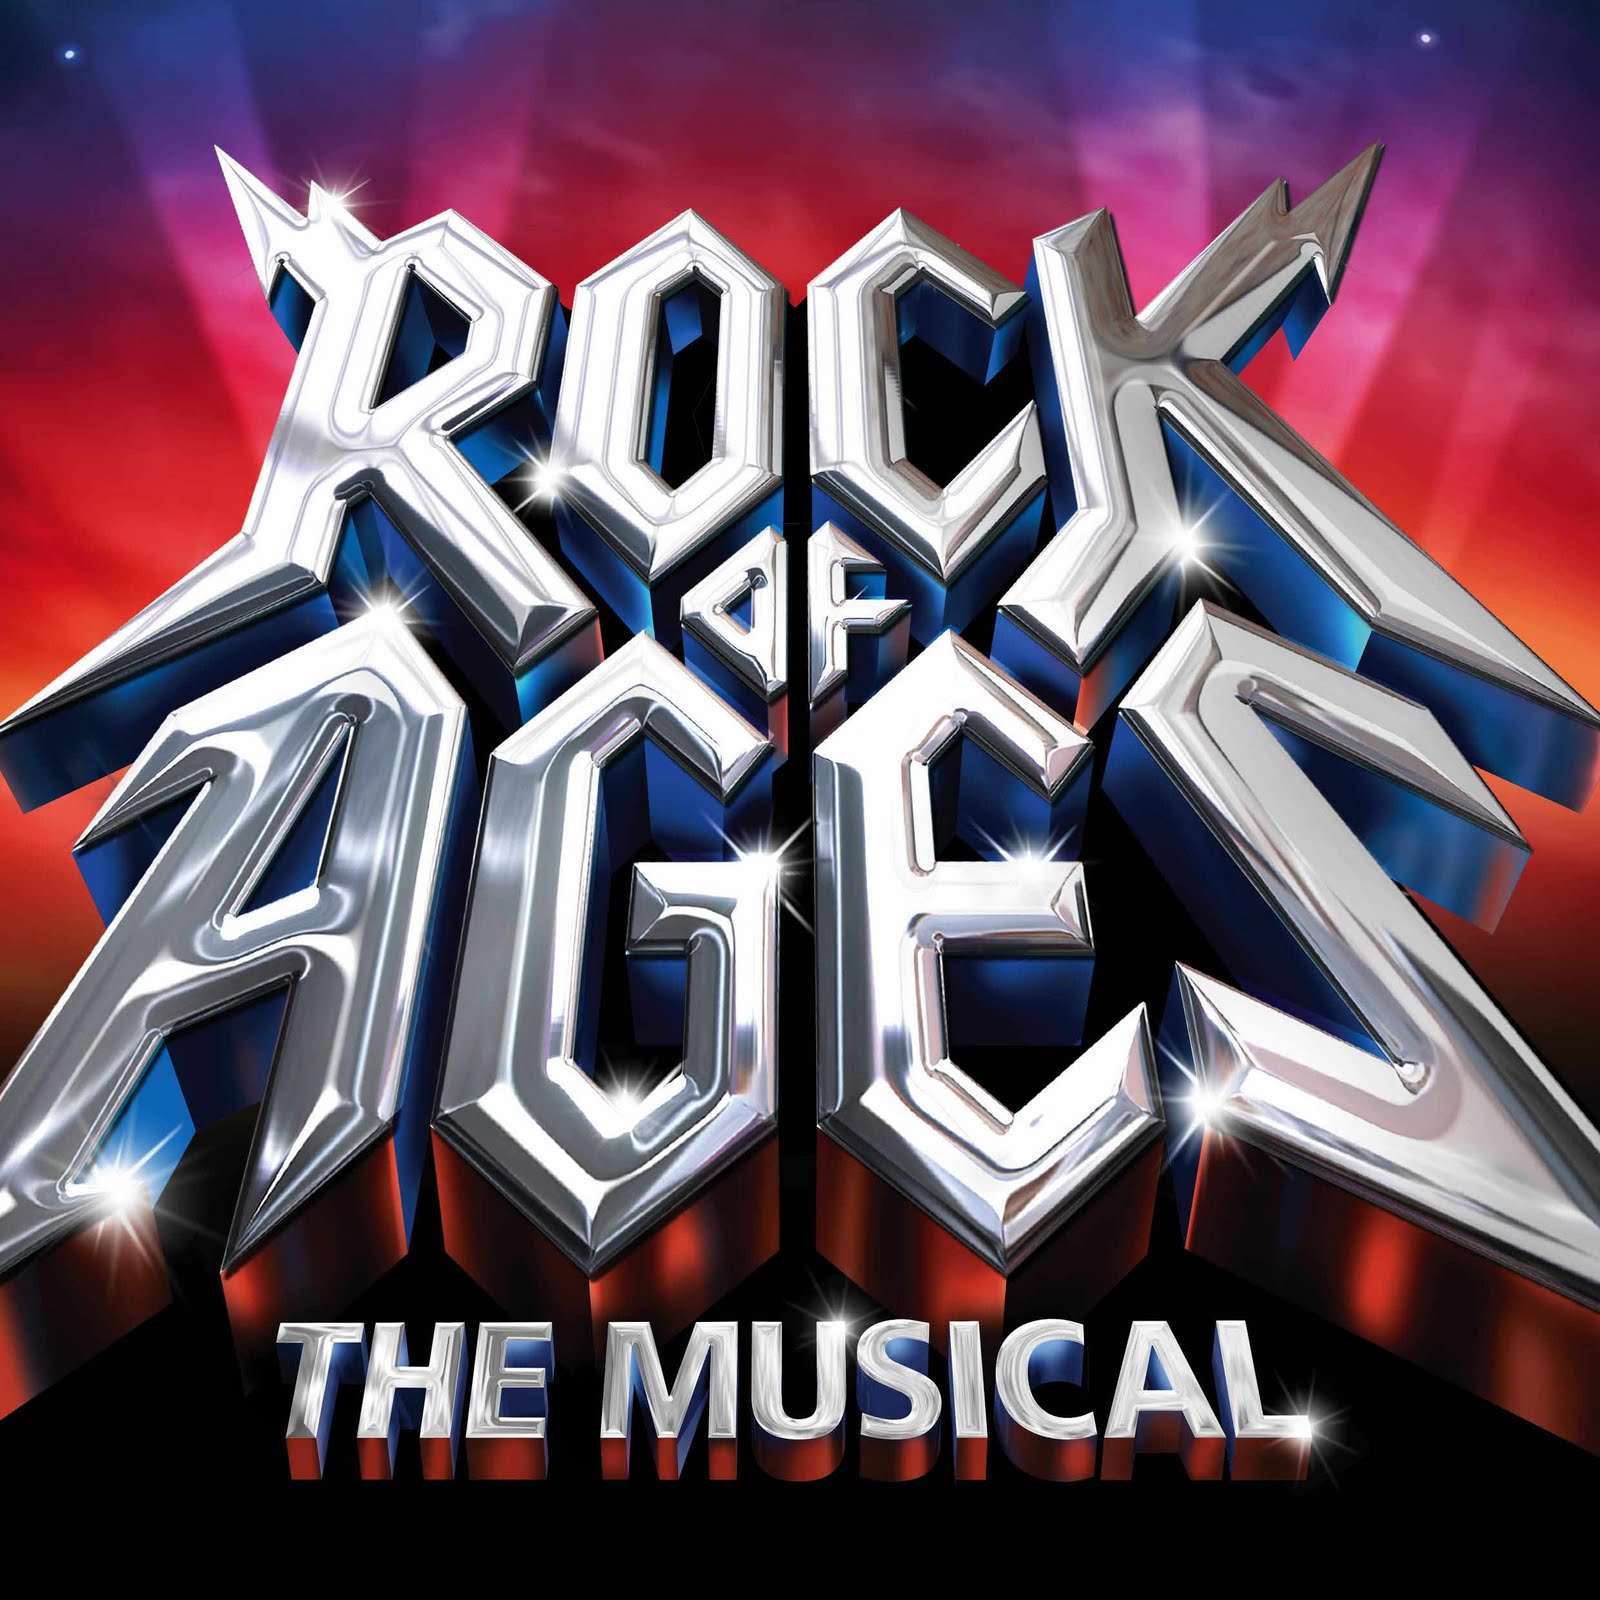 ROCK OF AGES THE MUSICAL Announces Full London Cast & WEST END LIVE